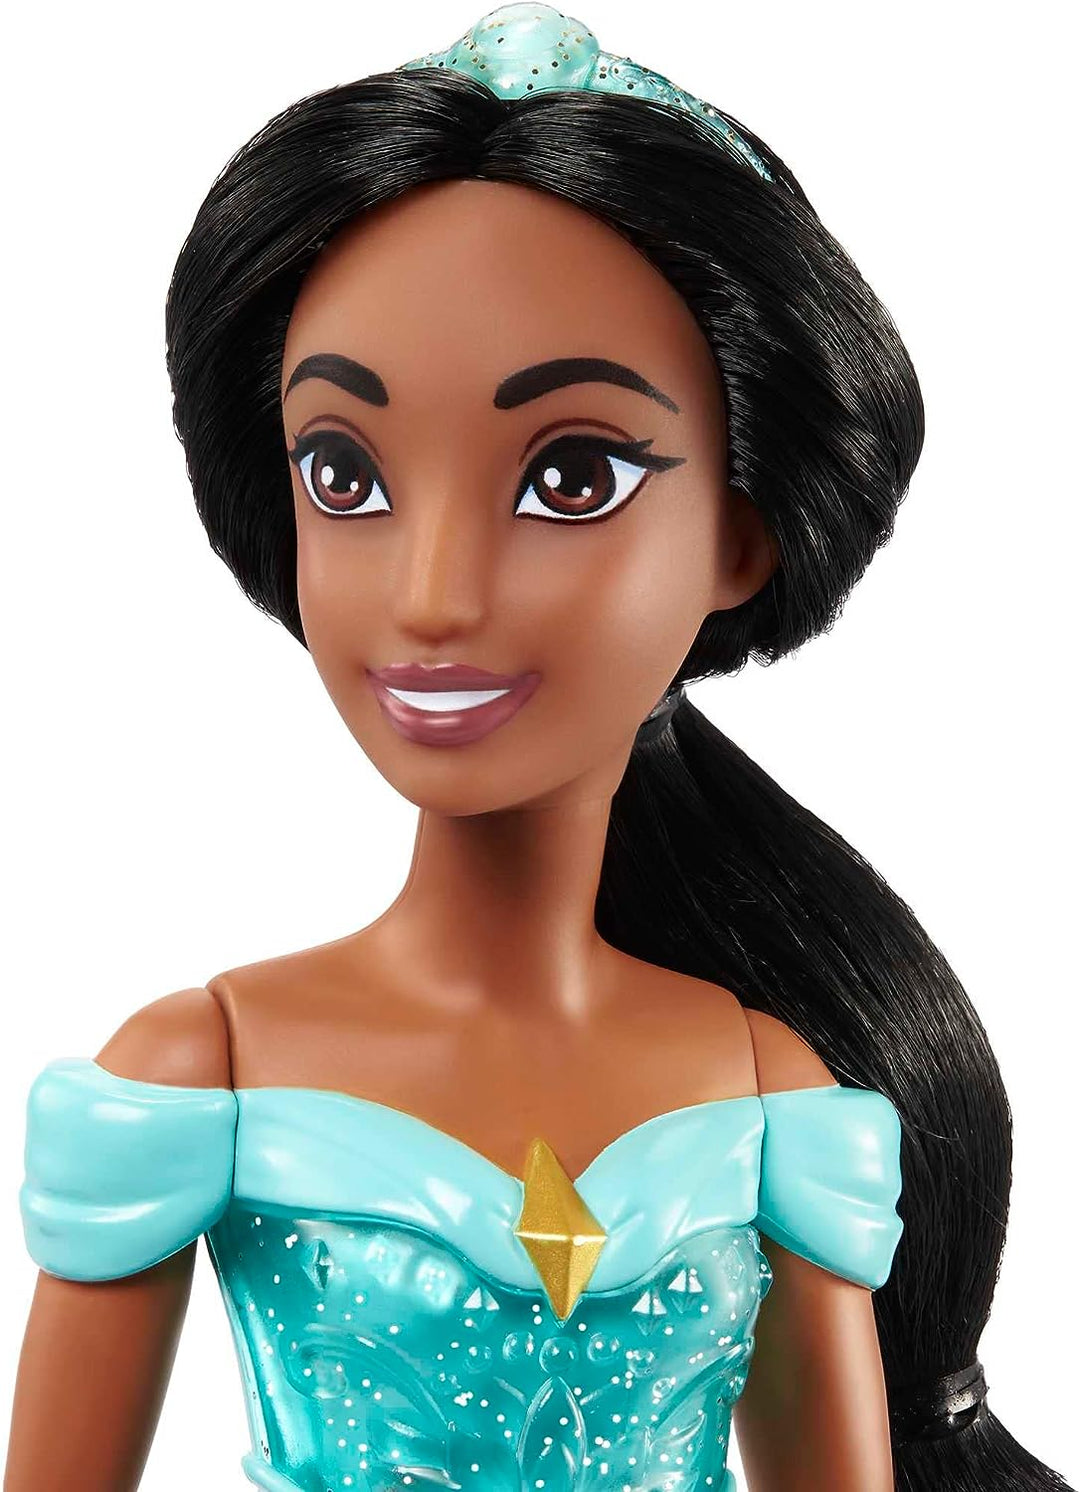 Disney Princess Toys, Jasmine Posable Fashion Doll with Sparkling Clothing and Accessories